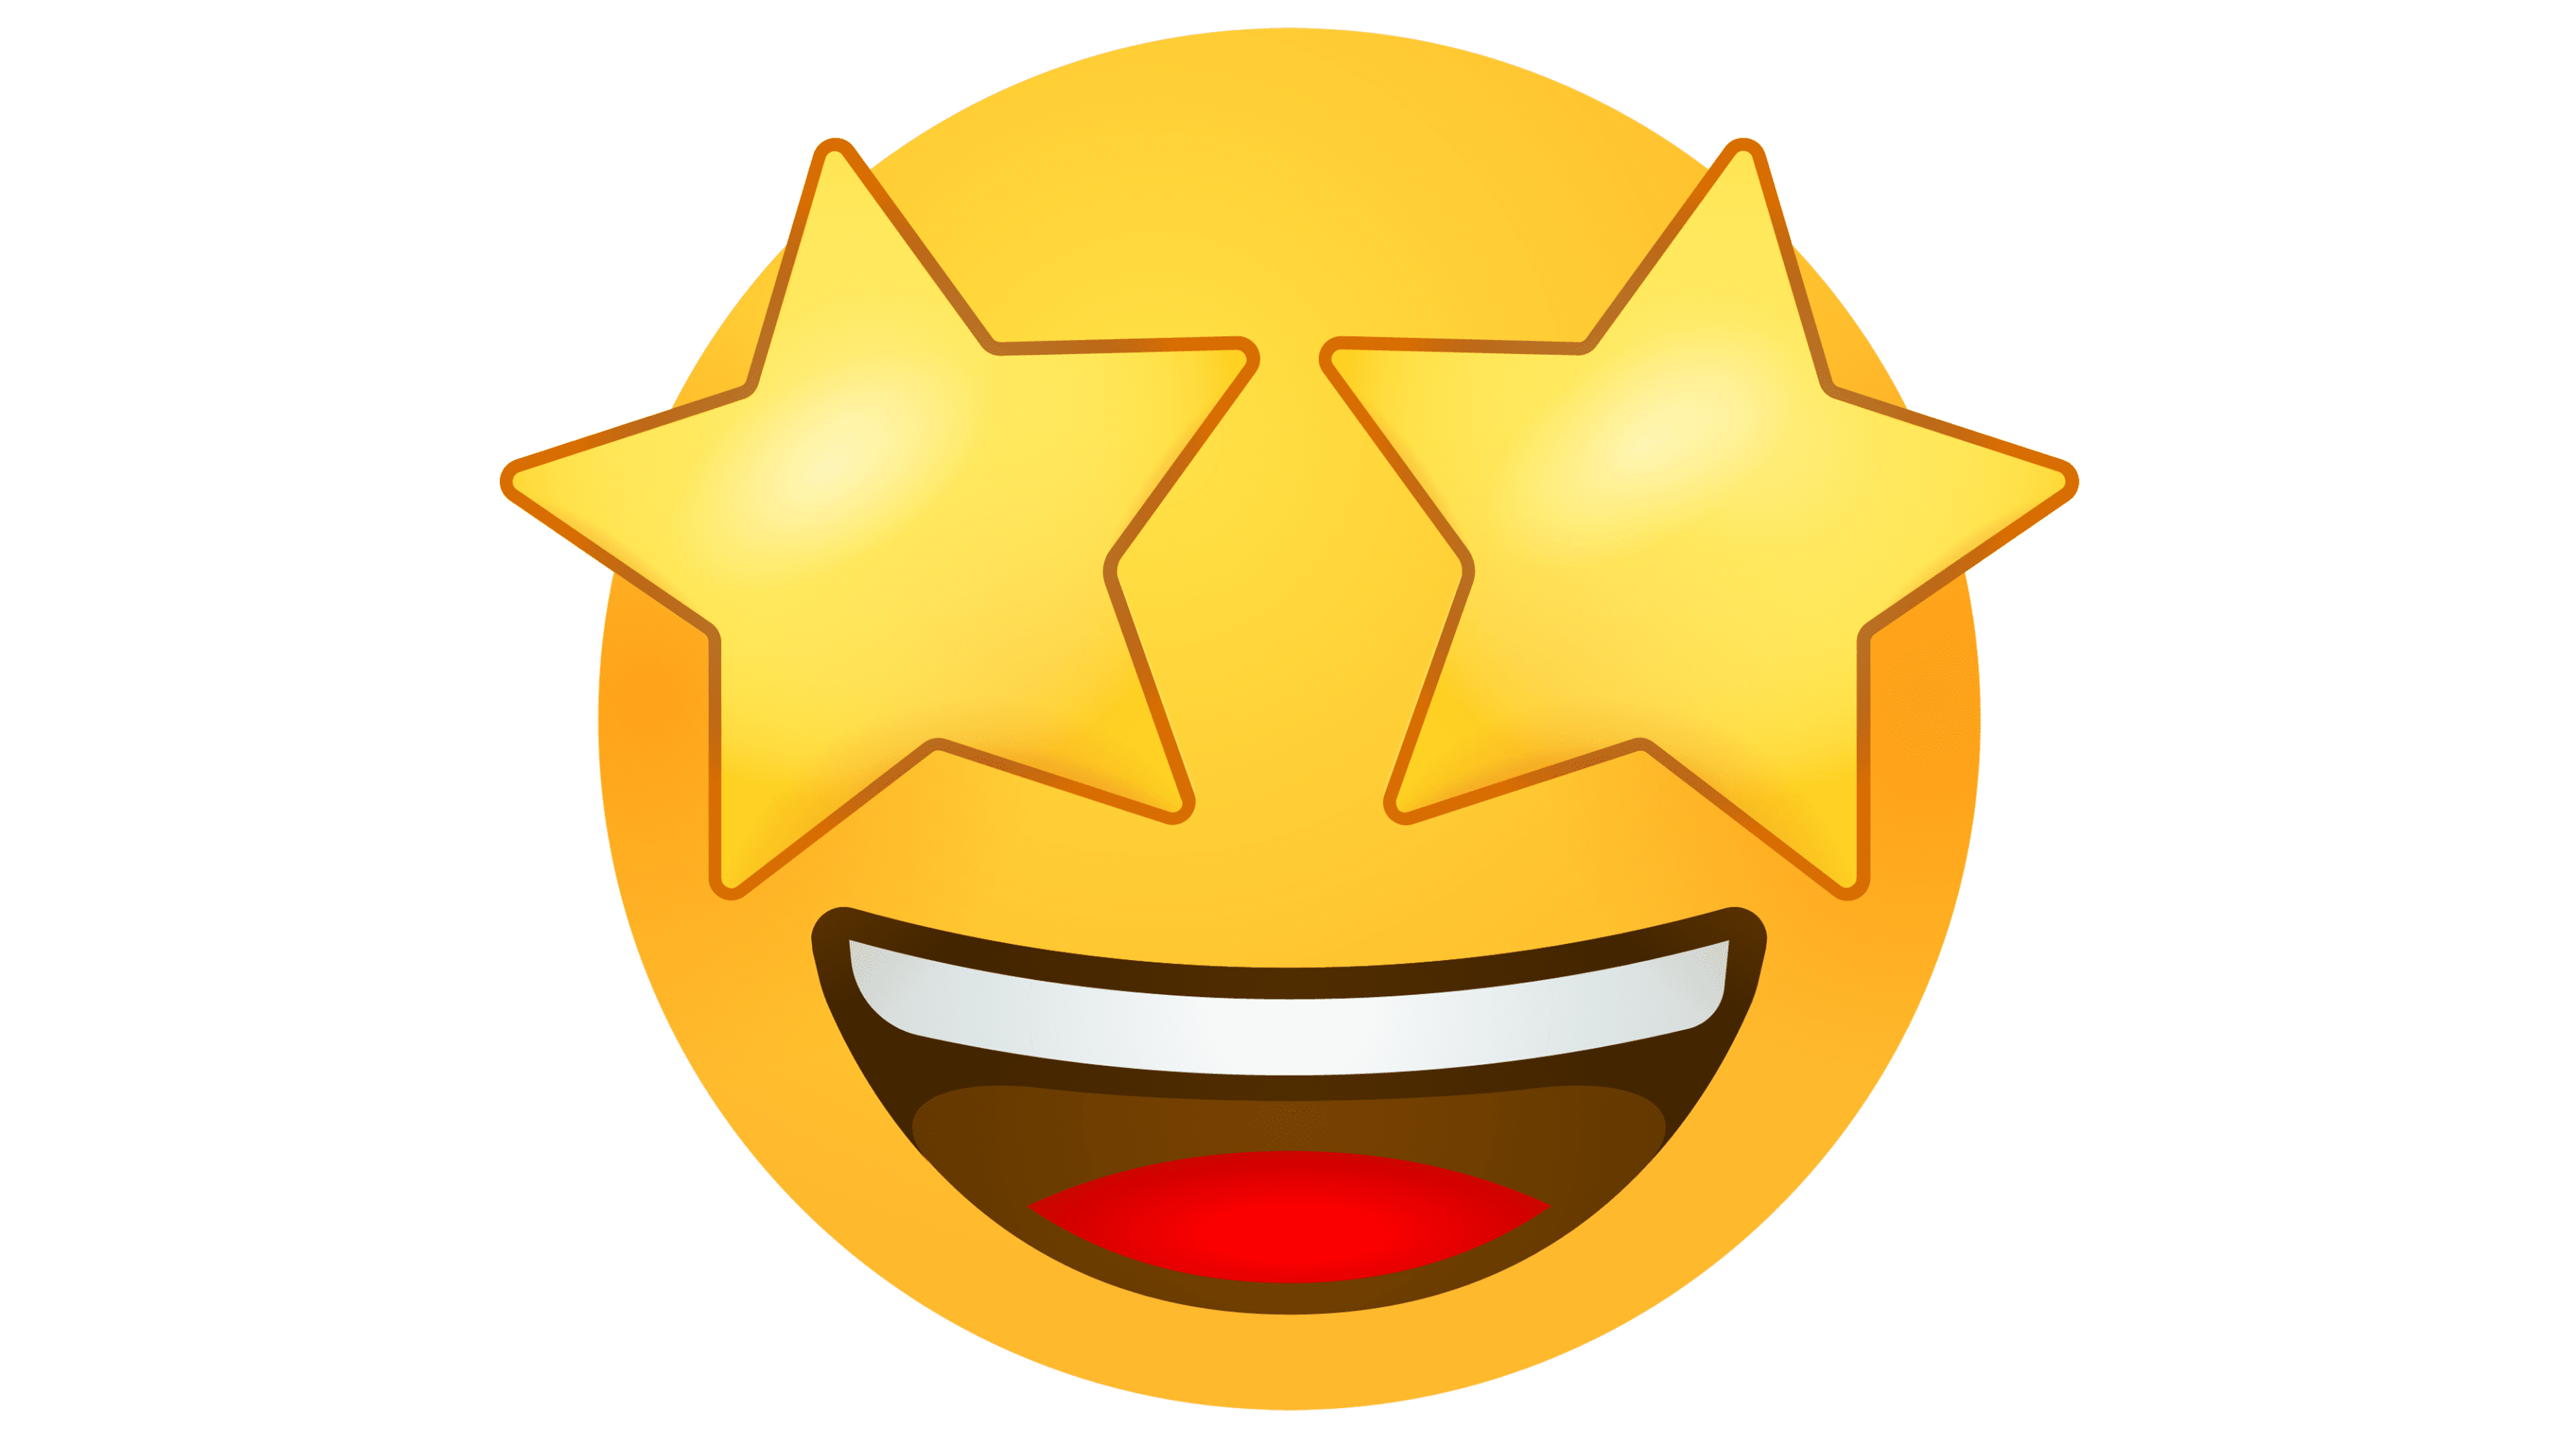 Star Eyes Emoji - what it means and how to use it.